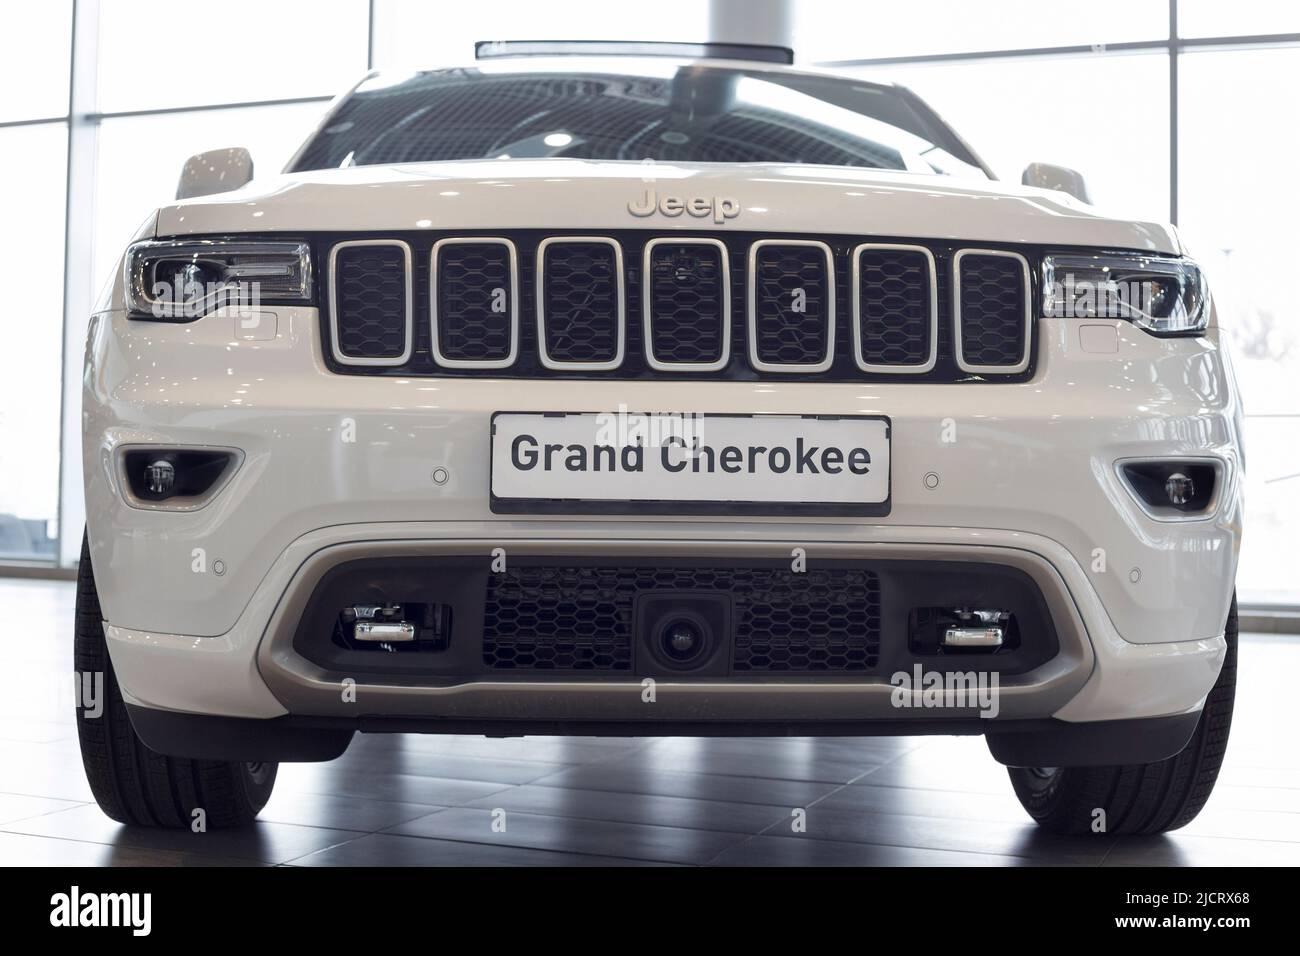 Russia, Izhevsk - March 4, 2022: Jeep showroom. New modern Grand Cherokee in dealer showroom. Front view. Off-road vehicles. Alliance Stellantis. Stock Photo